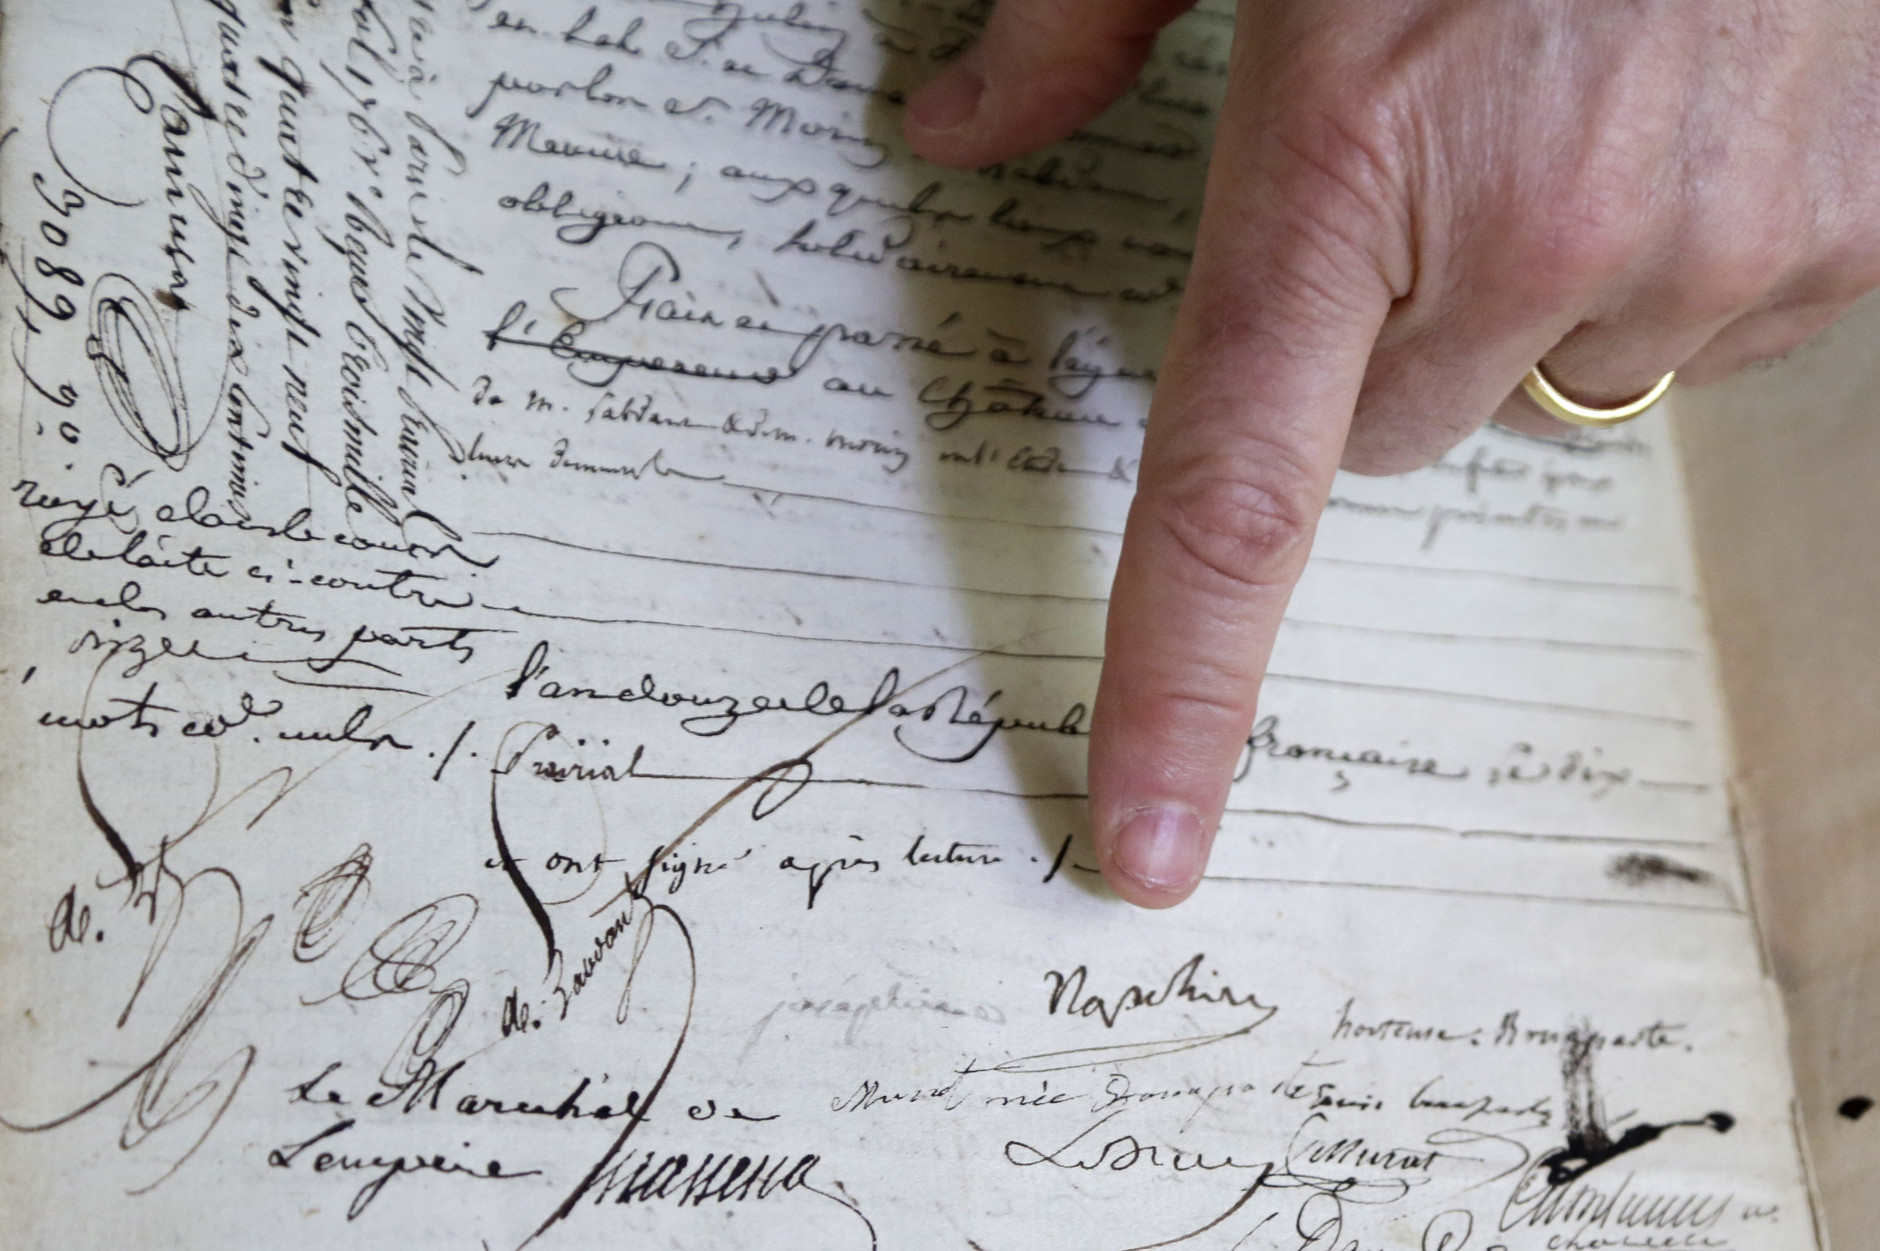 In this Monday, Feb. 8, 2016 photo, David Lowenherz  points to the signatures of Napoleon Bonaparte and to the left, Josephine de Beauharnais, on a marriage contract, in West Palm Beach, Fla.  Lowenherz, of Lion Heart Autographs, will put the document up for sale this week at the Palm Beach Jewelry, Art &amp; Antique Show. (AP Photo/Lynne Sladky)